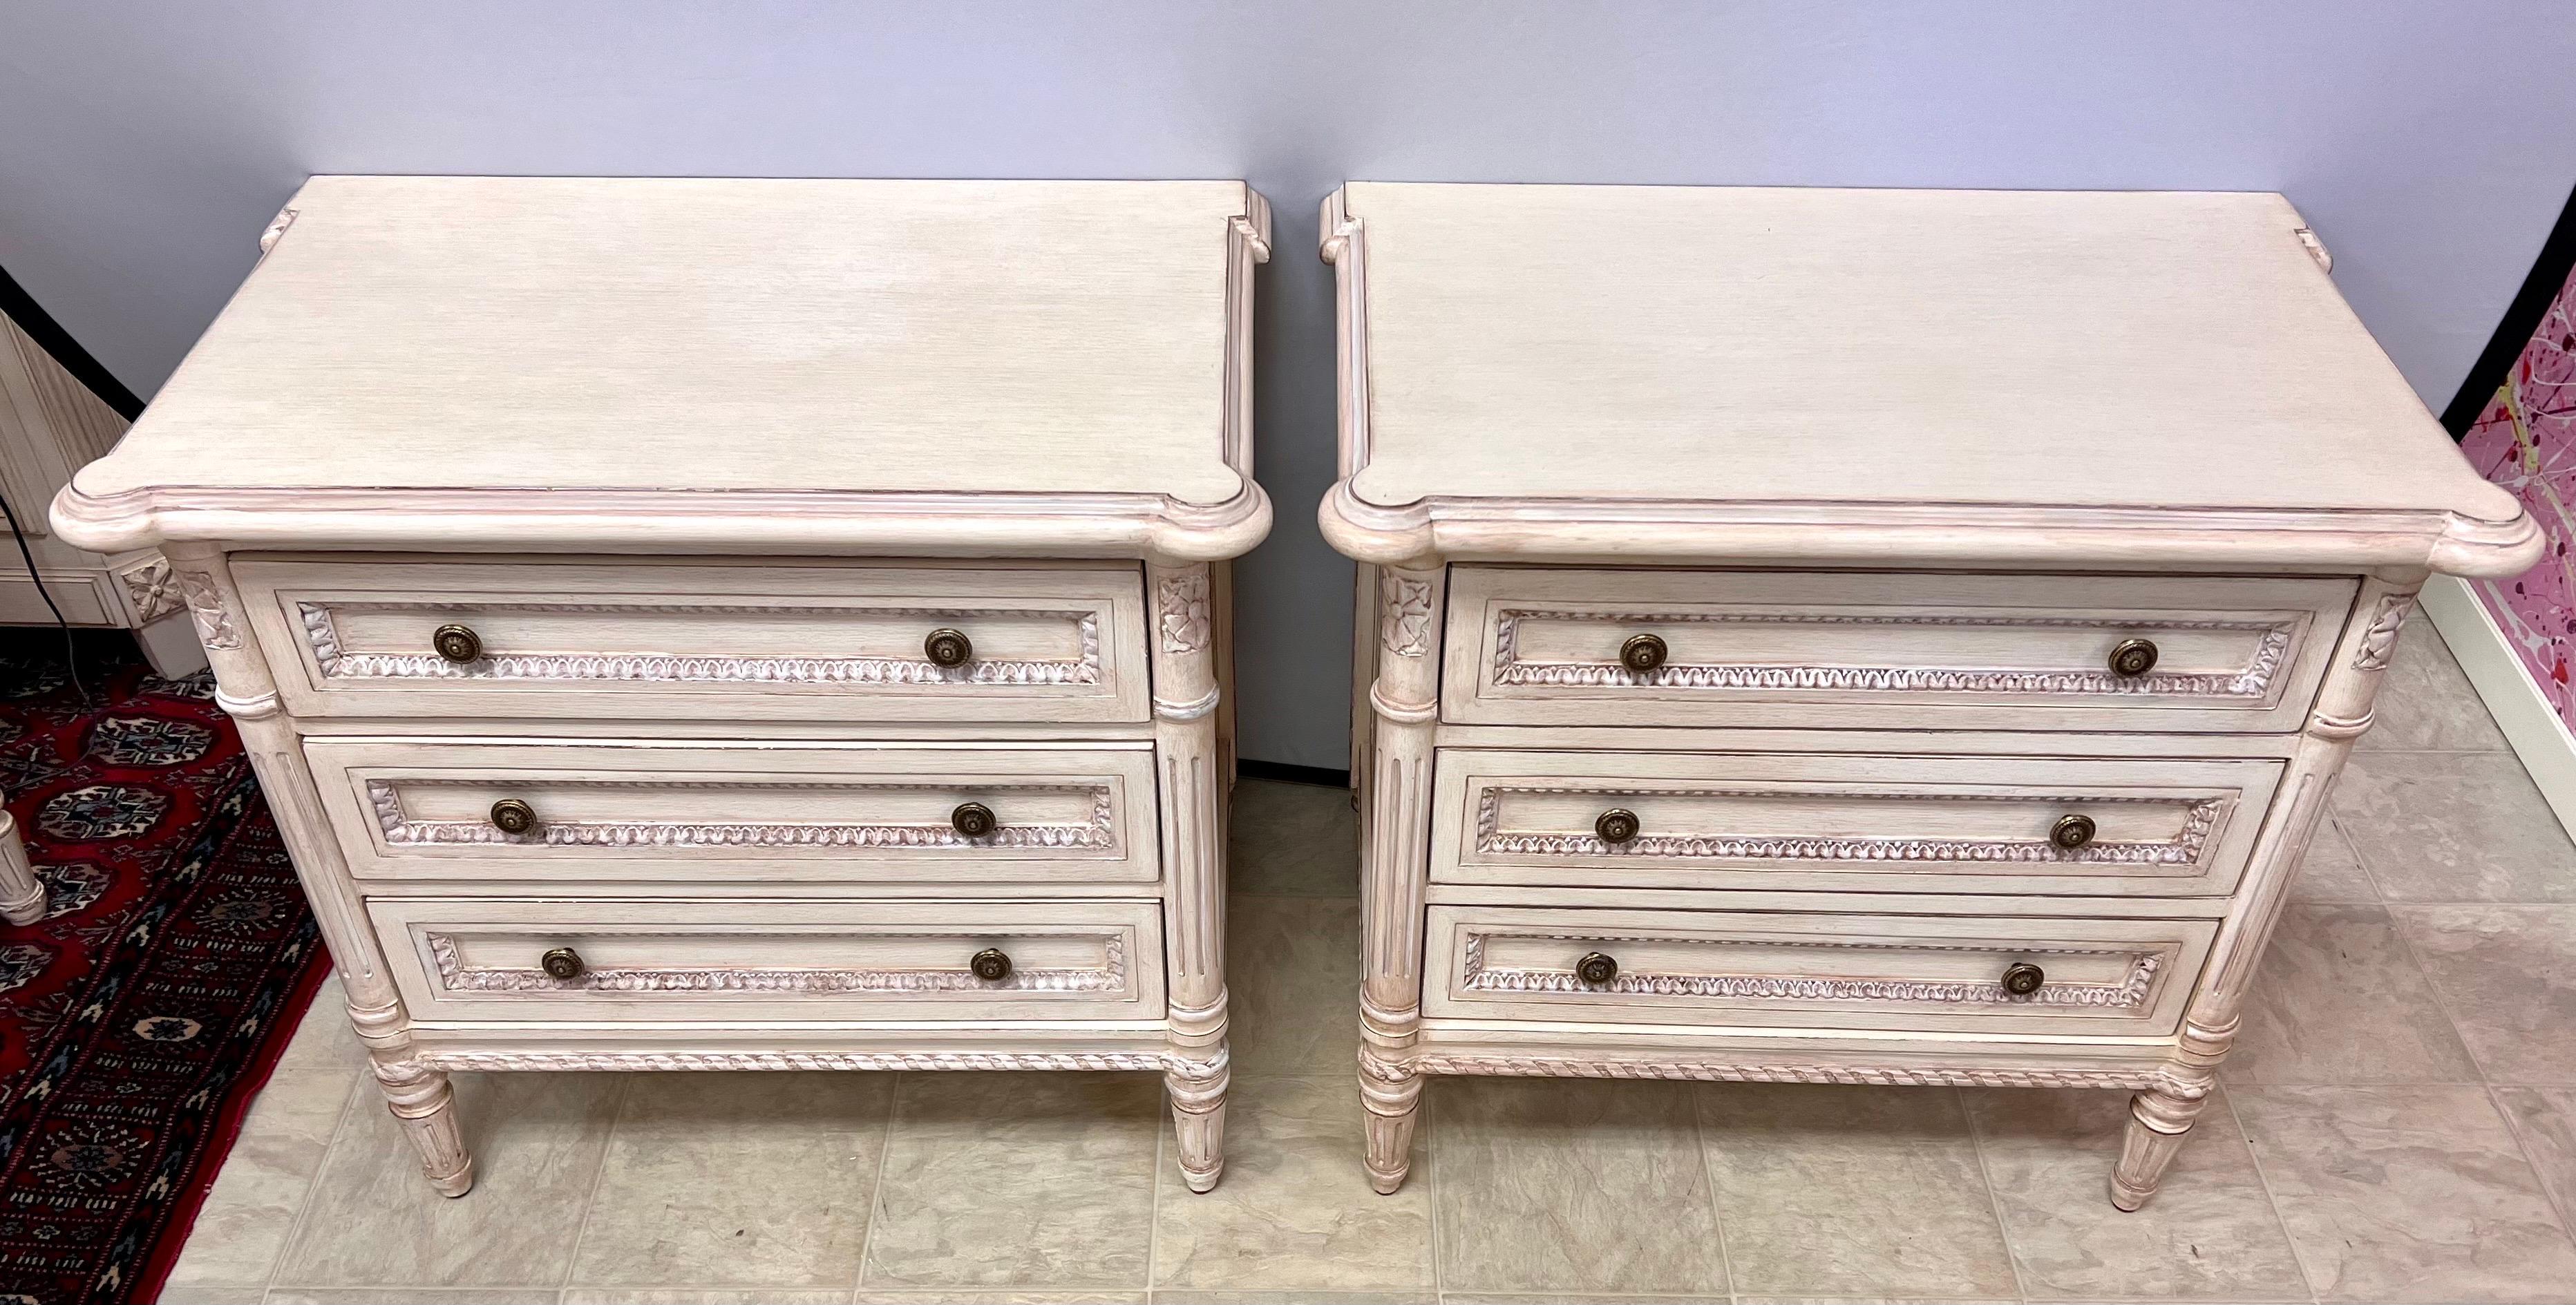 These exquisite nightstands by Louis J. Solomon embody the timeless charm of the Louis XVI style, meticulously crafted with intricate carved details and a beautifully distressed cream finish. With their three spacious drawers, they offer both